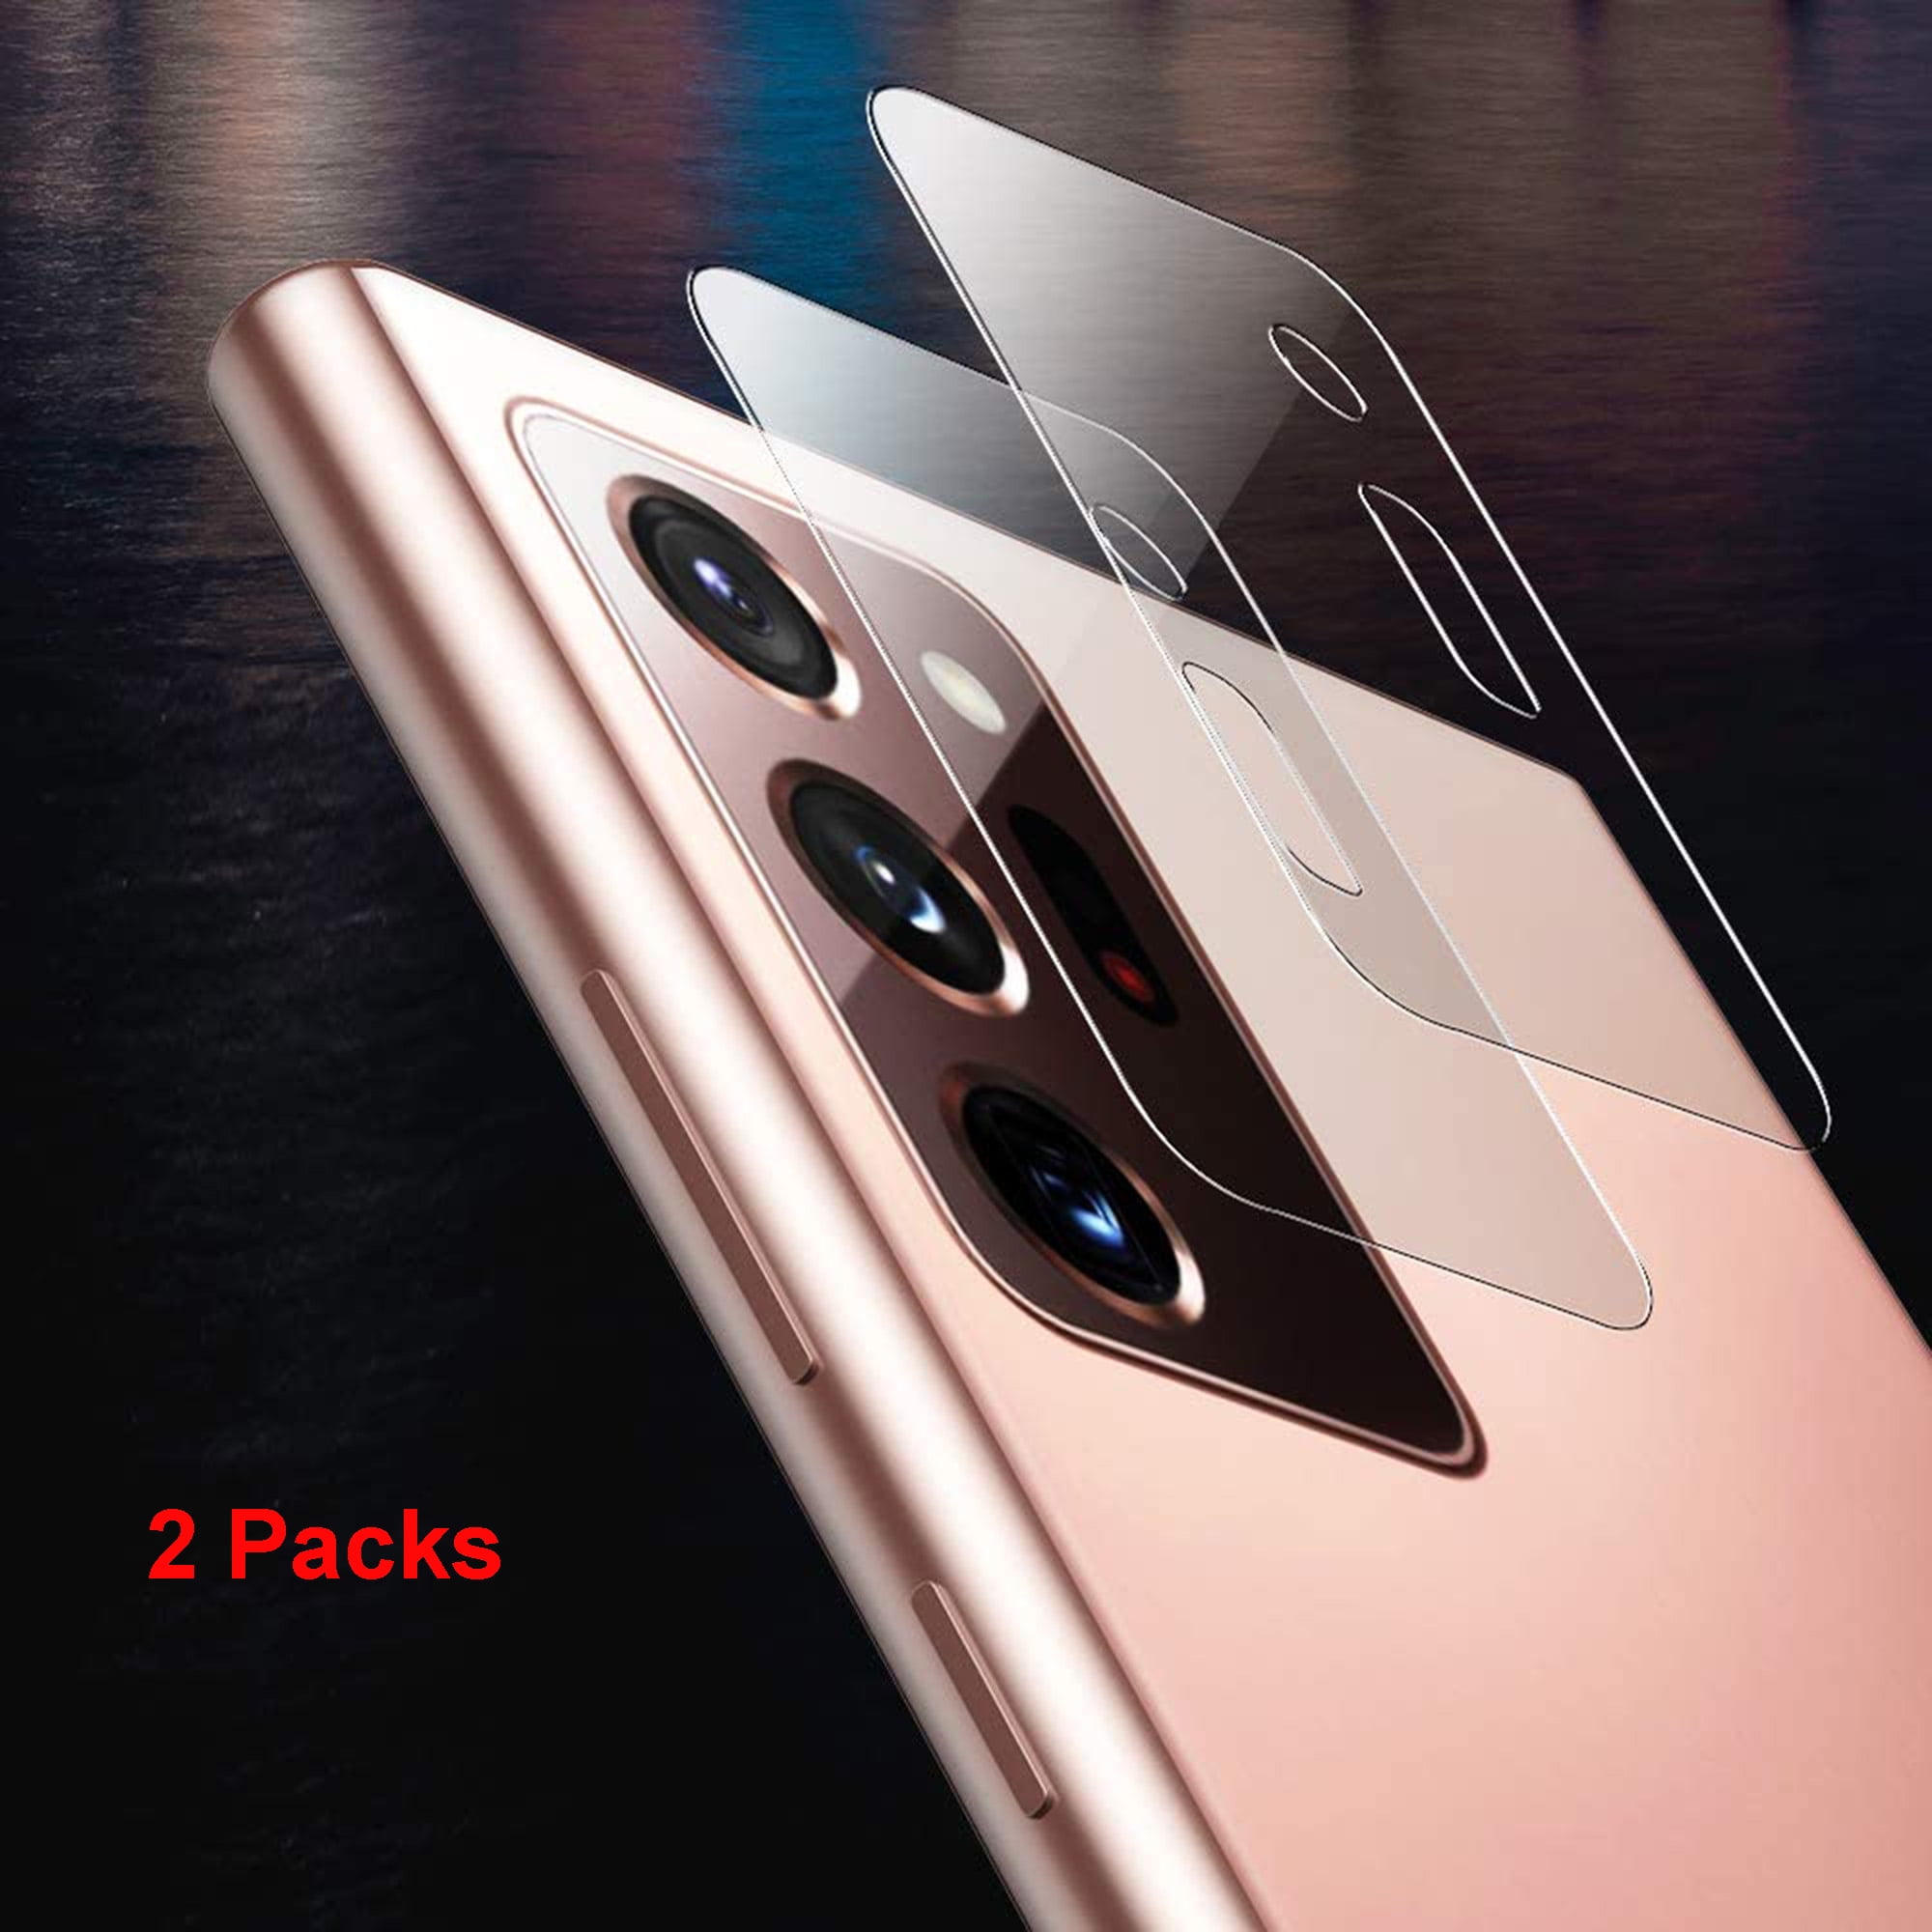 Camera Lens Protector 2 + 2 Pack Anti-Scratch Case Friendly Galaxy Note 20 Tempered Glass Screen Protector Compatible Fingerprint Clear HD Protective Film for Samsung Galaxy Note 20 